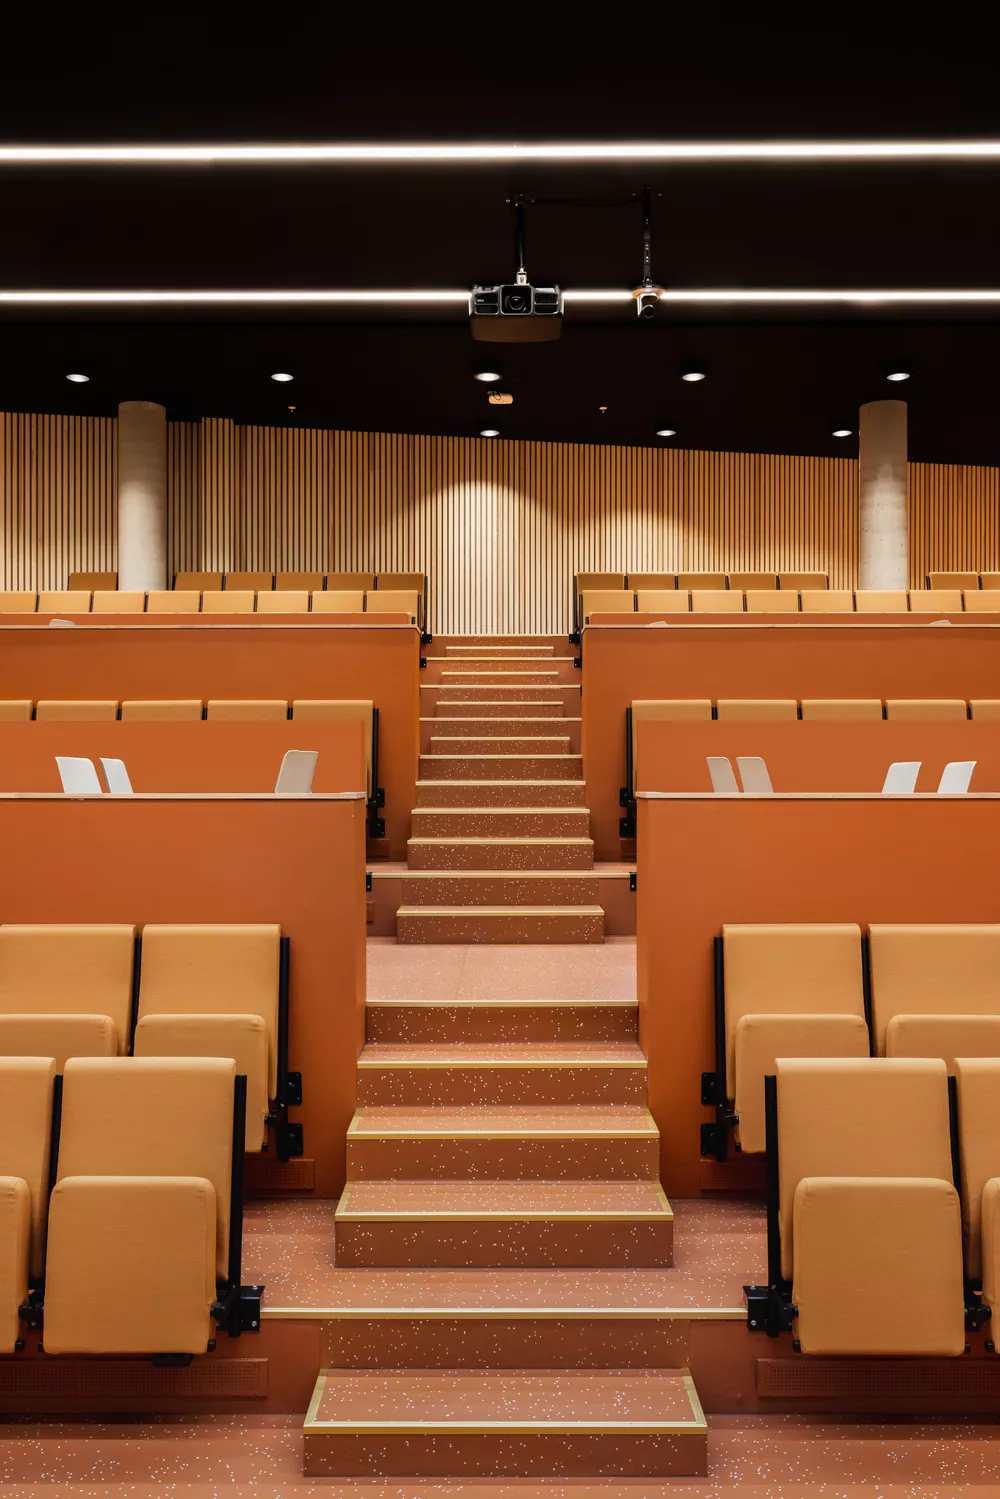 Audio auditorium chairs by Fora Form photo by Alex Coppo